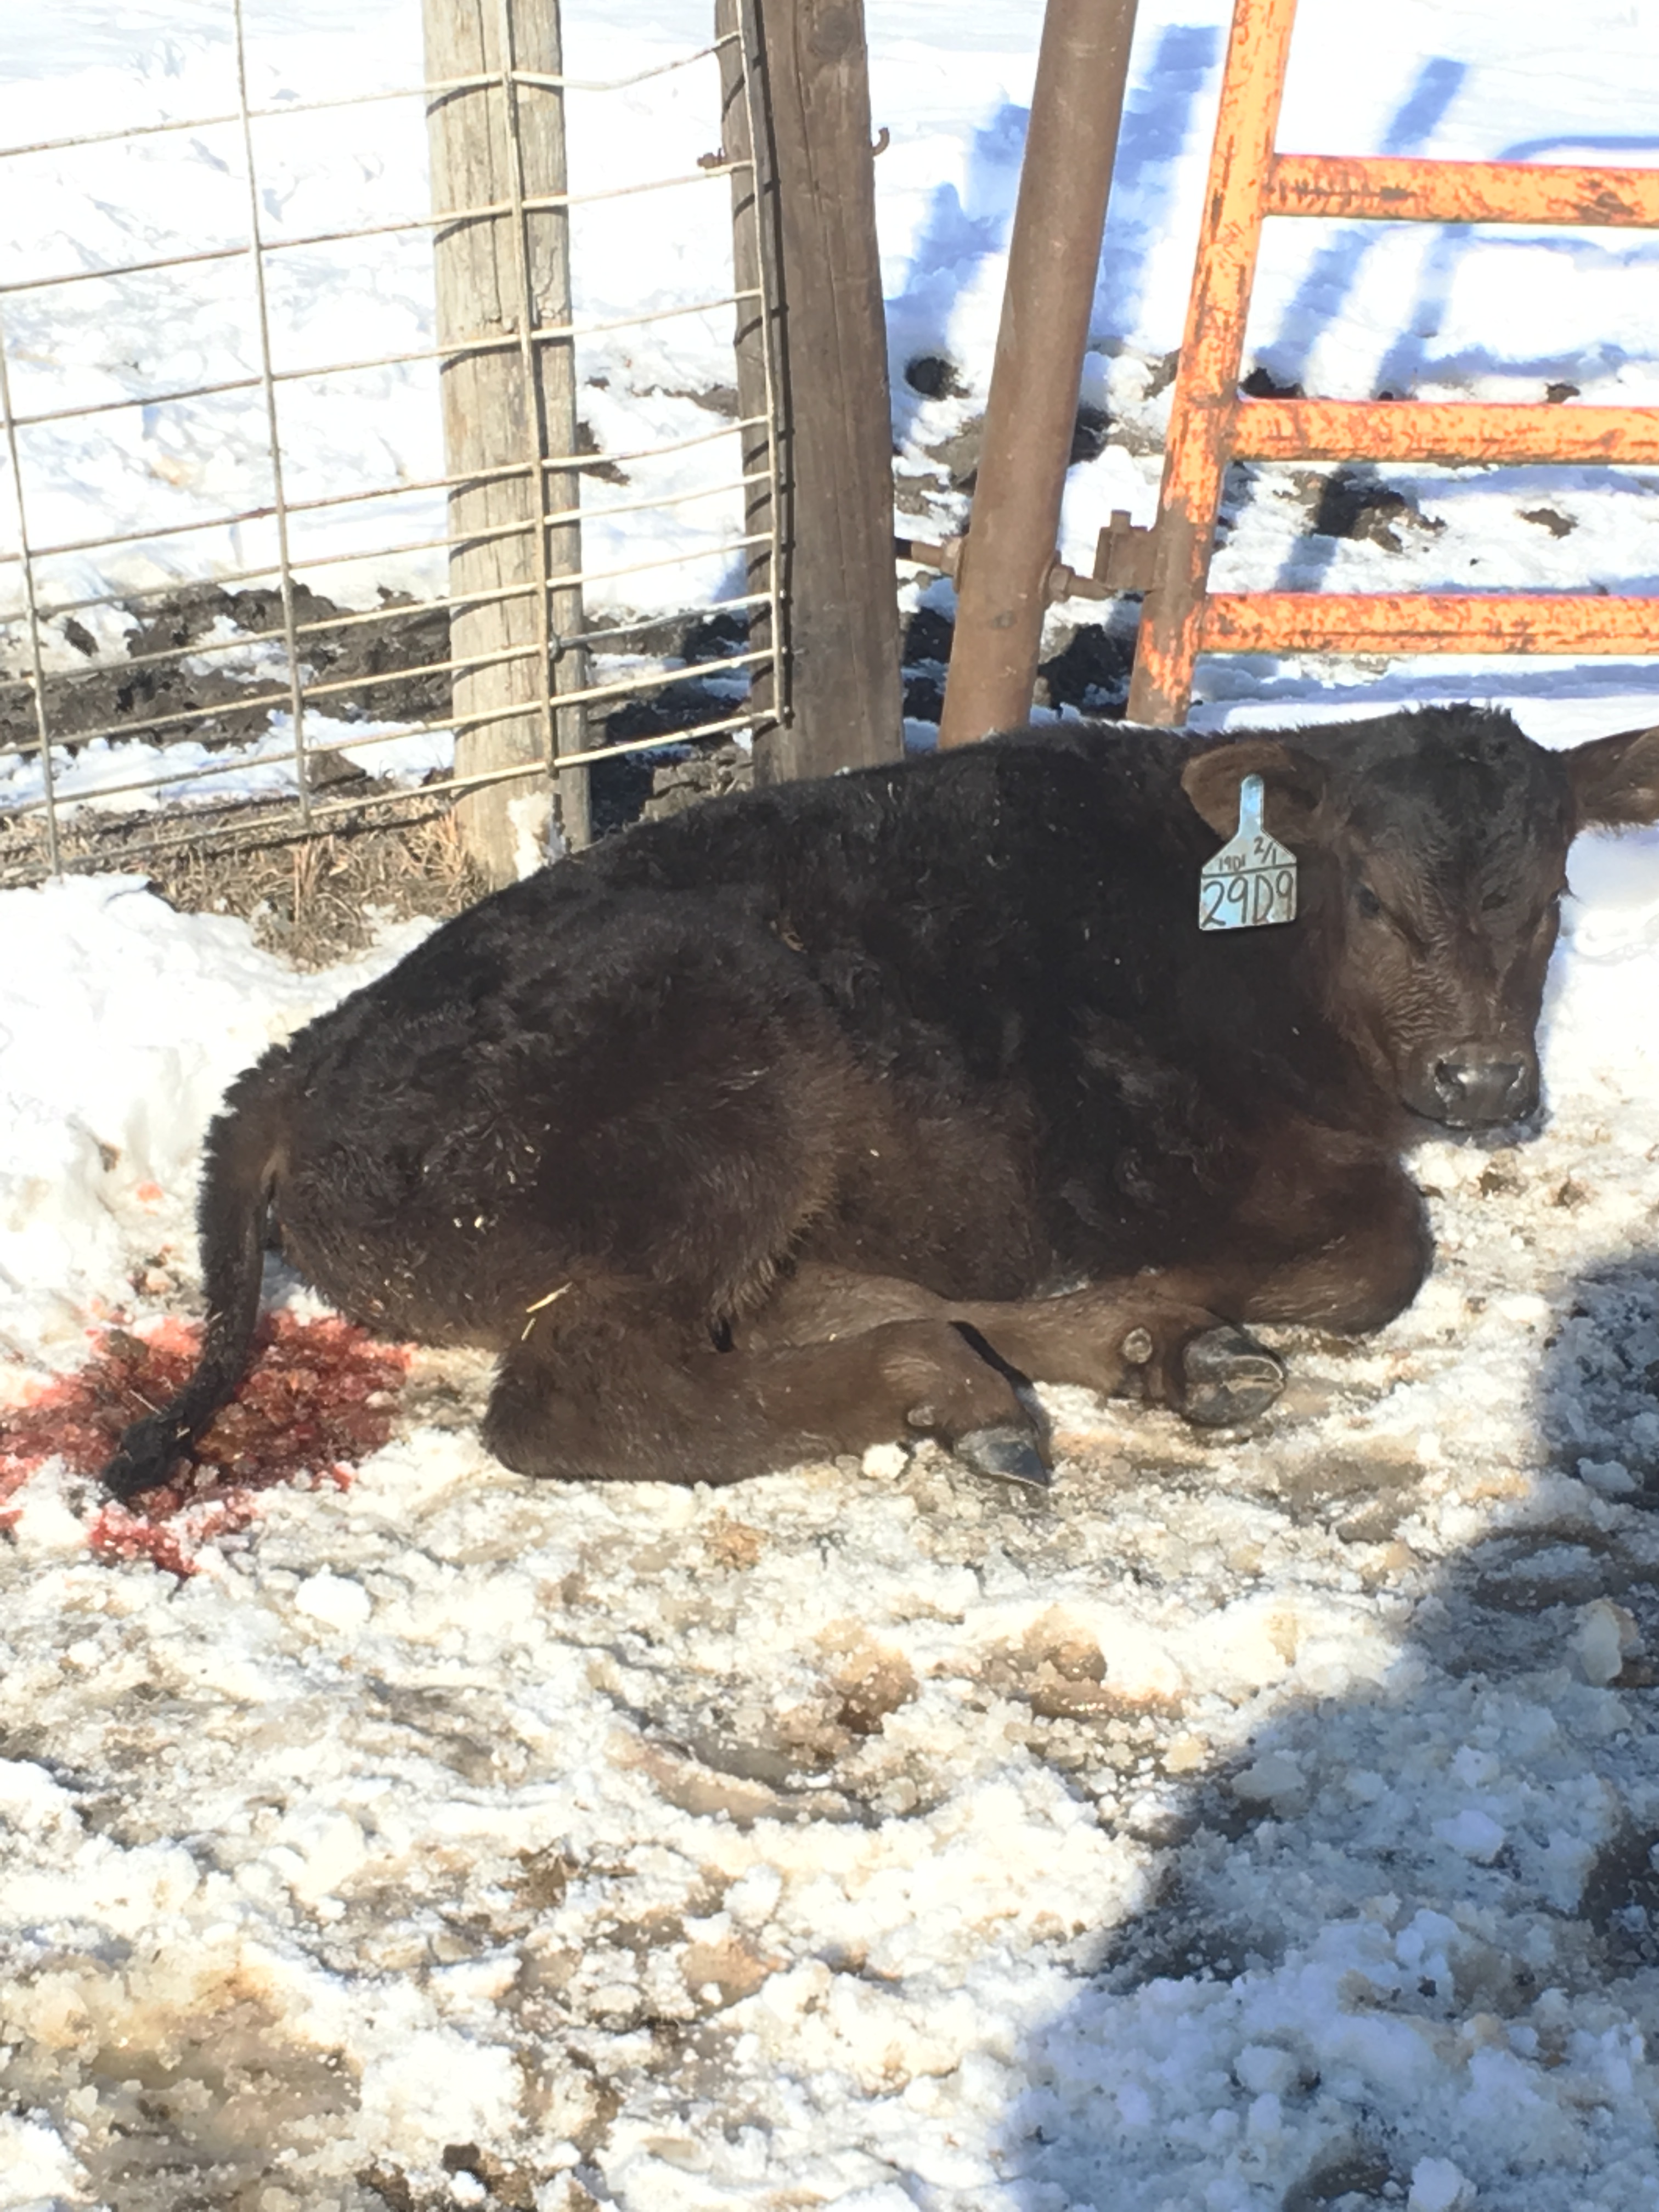 Blood in the feces is one symptom in a calf with coccidiosis. (NDSU photo)